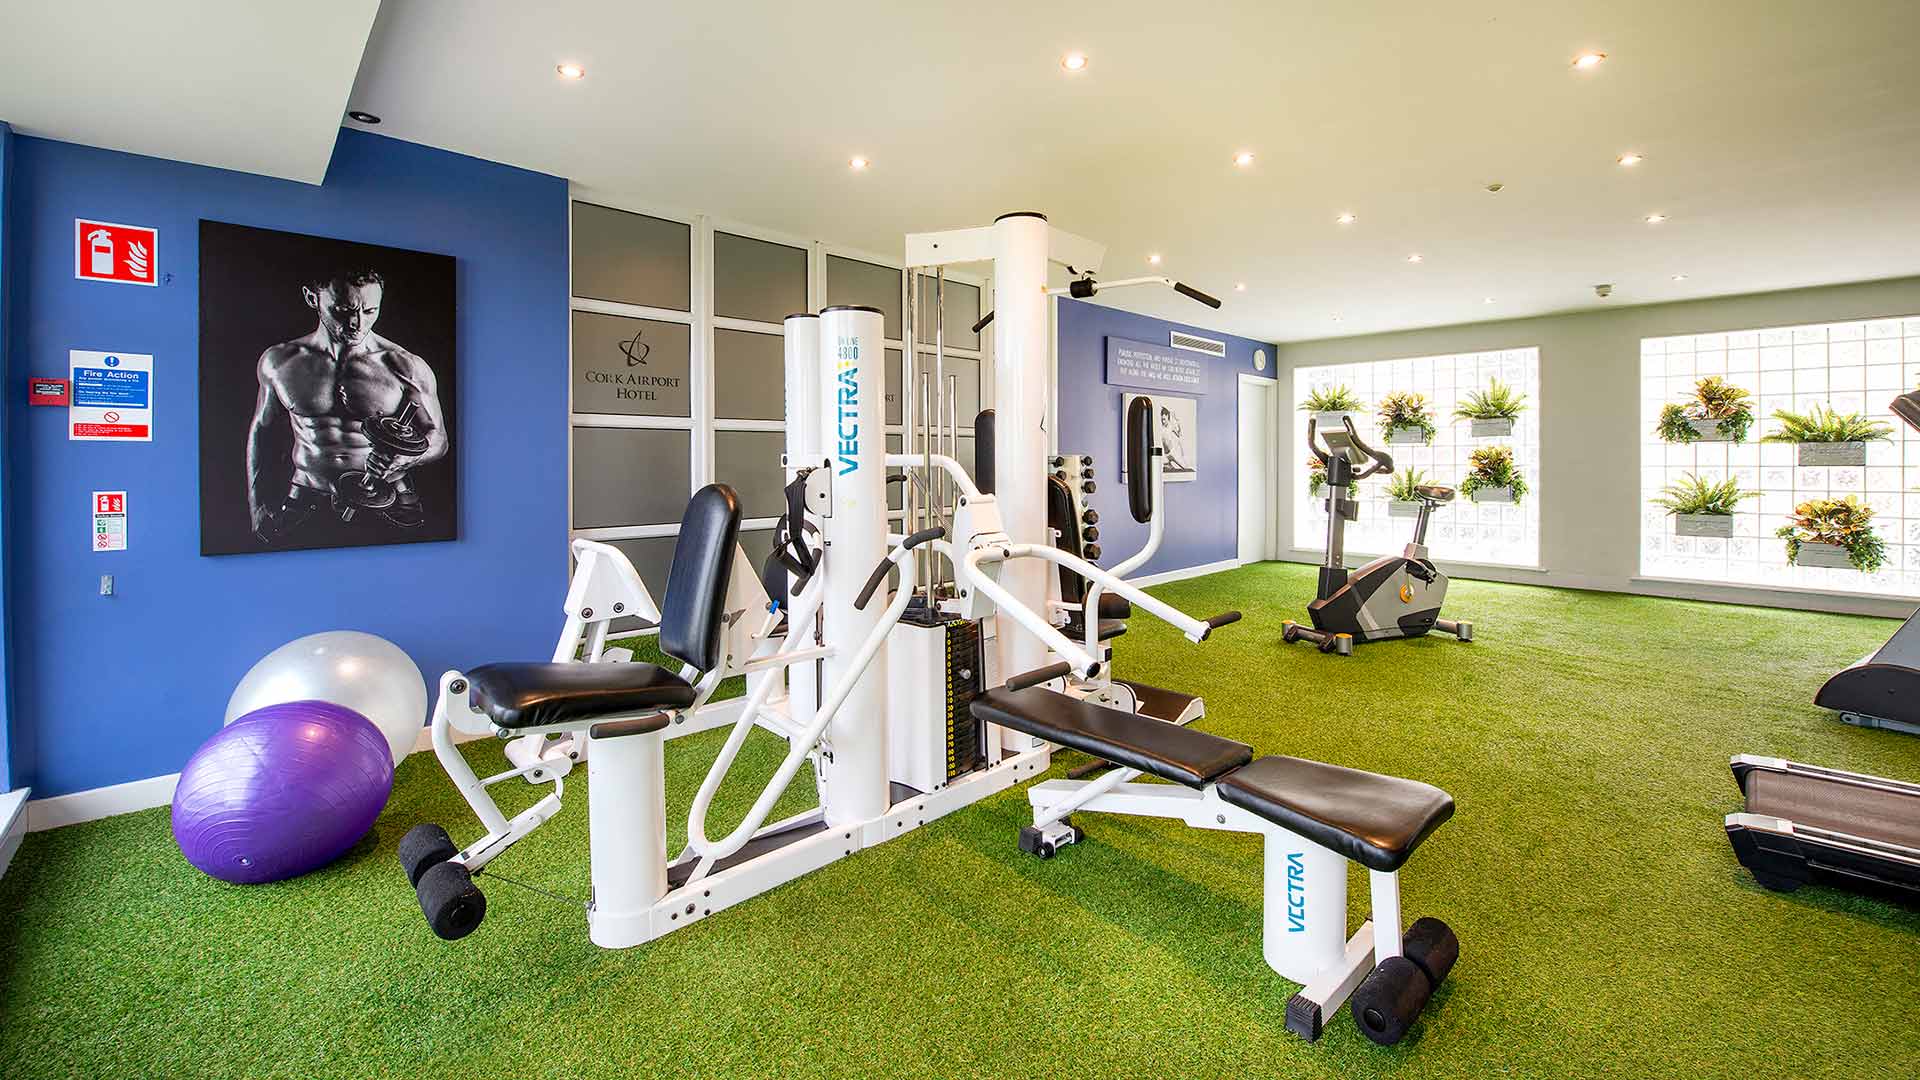 Gym equipment, Pilates balls and motivational decor at the Cork Airport Hotel gym